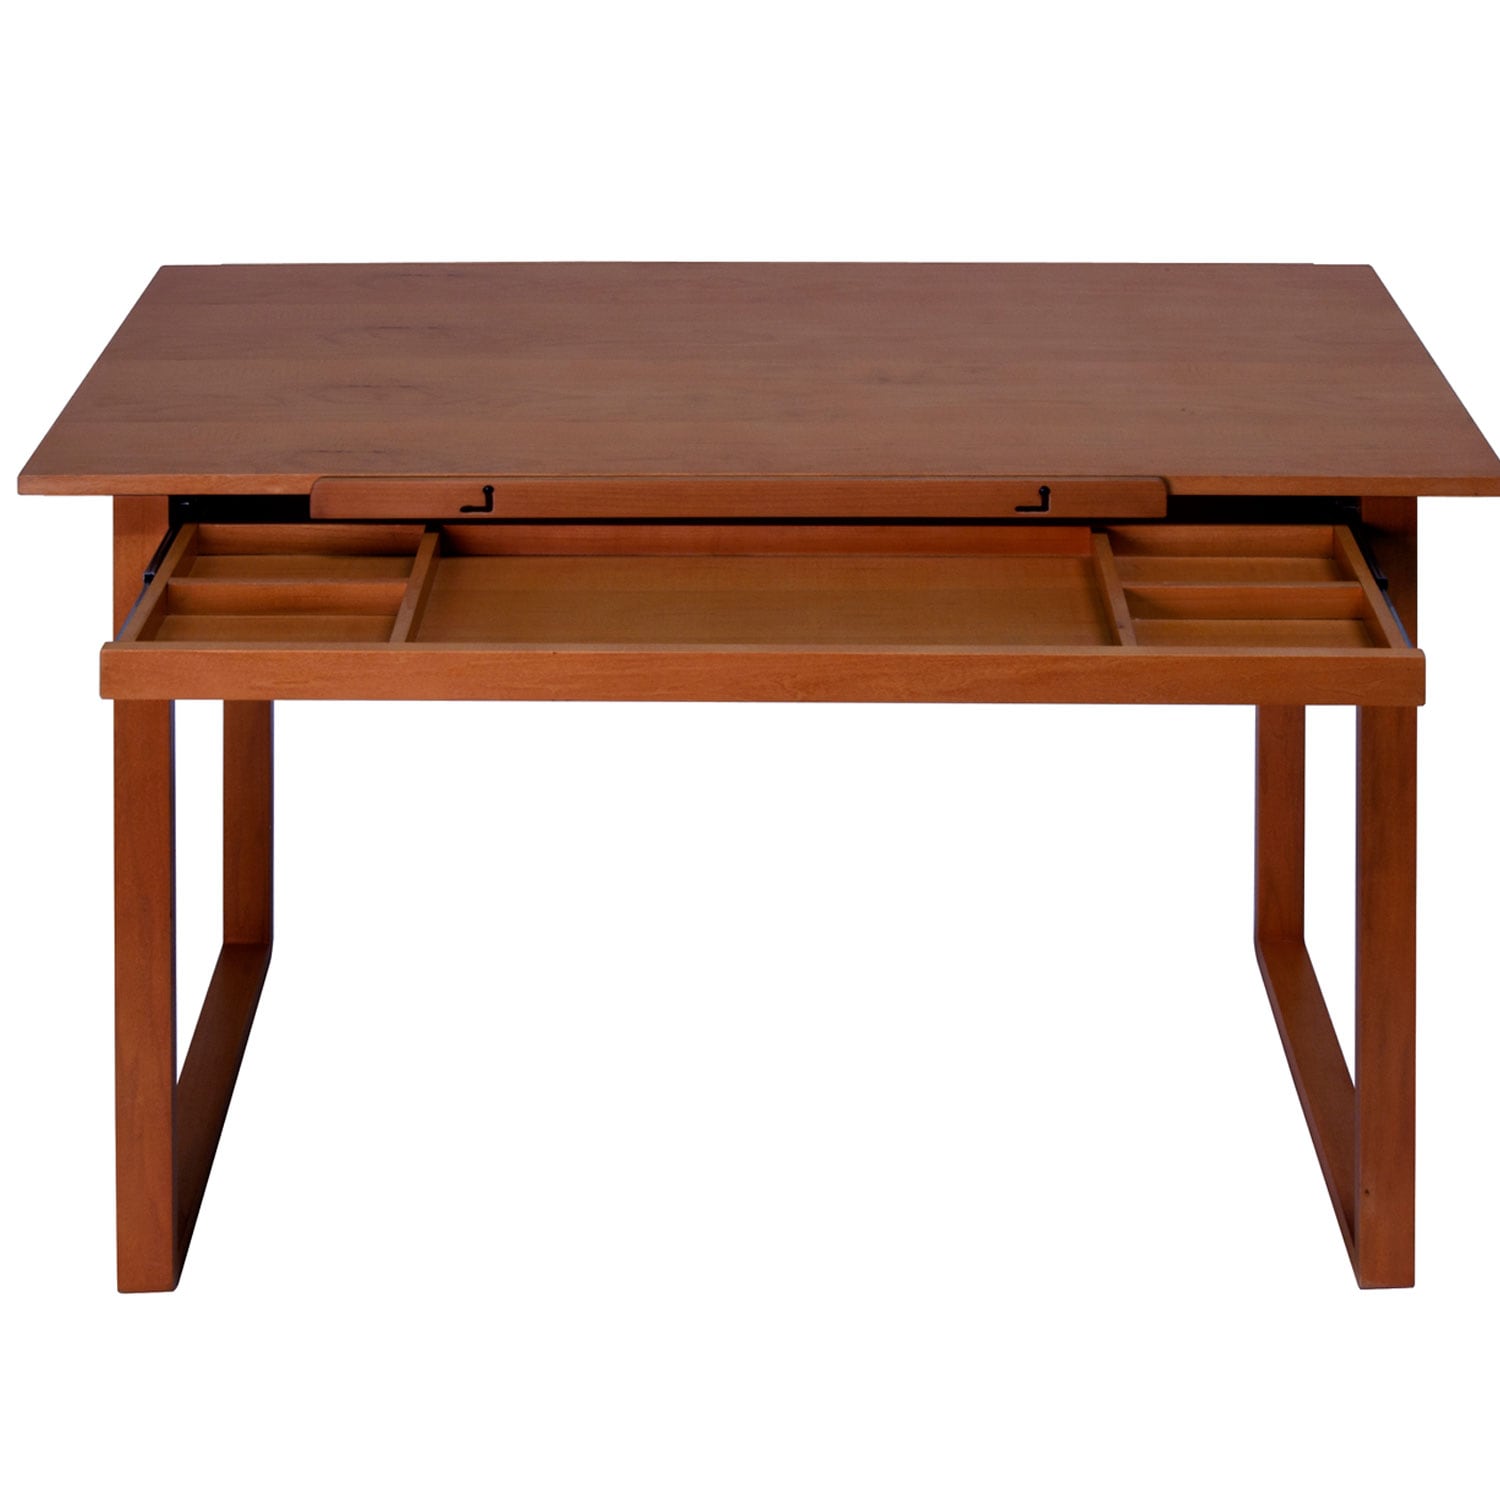 Offex Ponderosa Wood Topped Table (sonoma Brown)